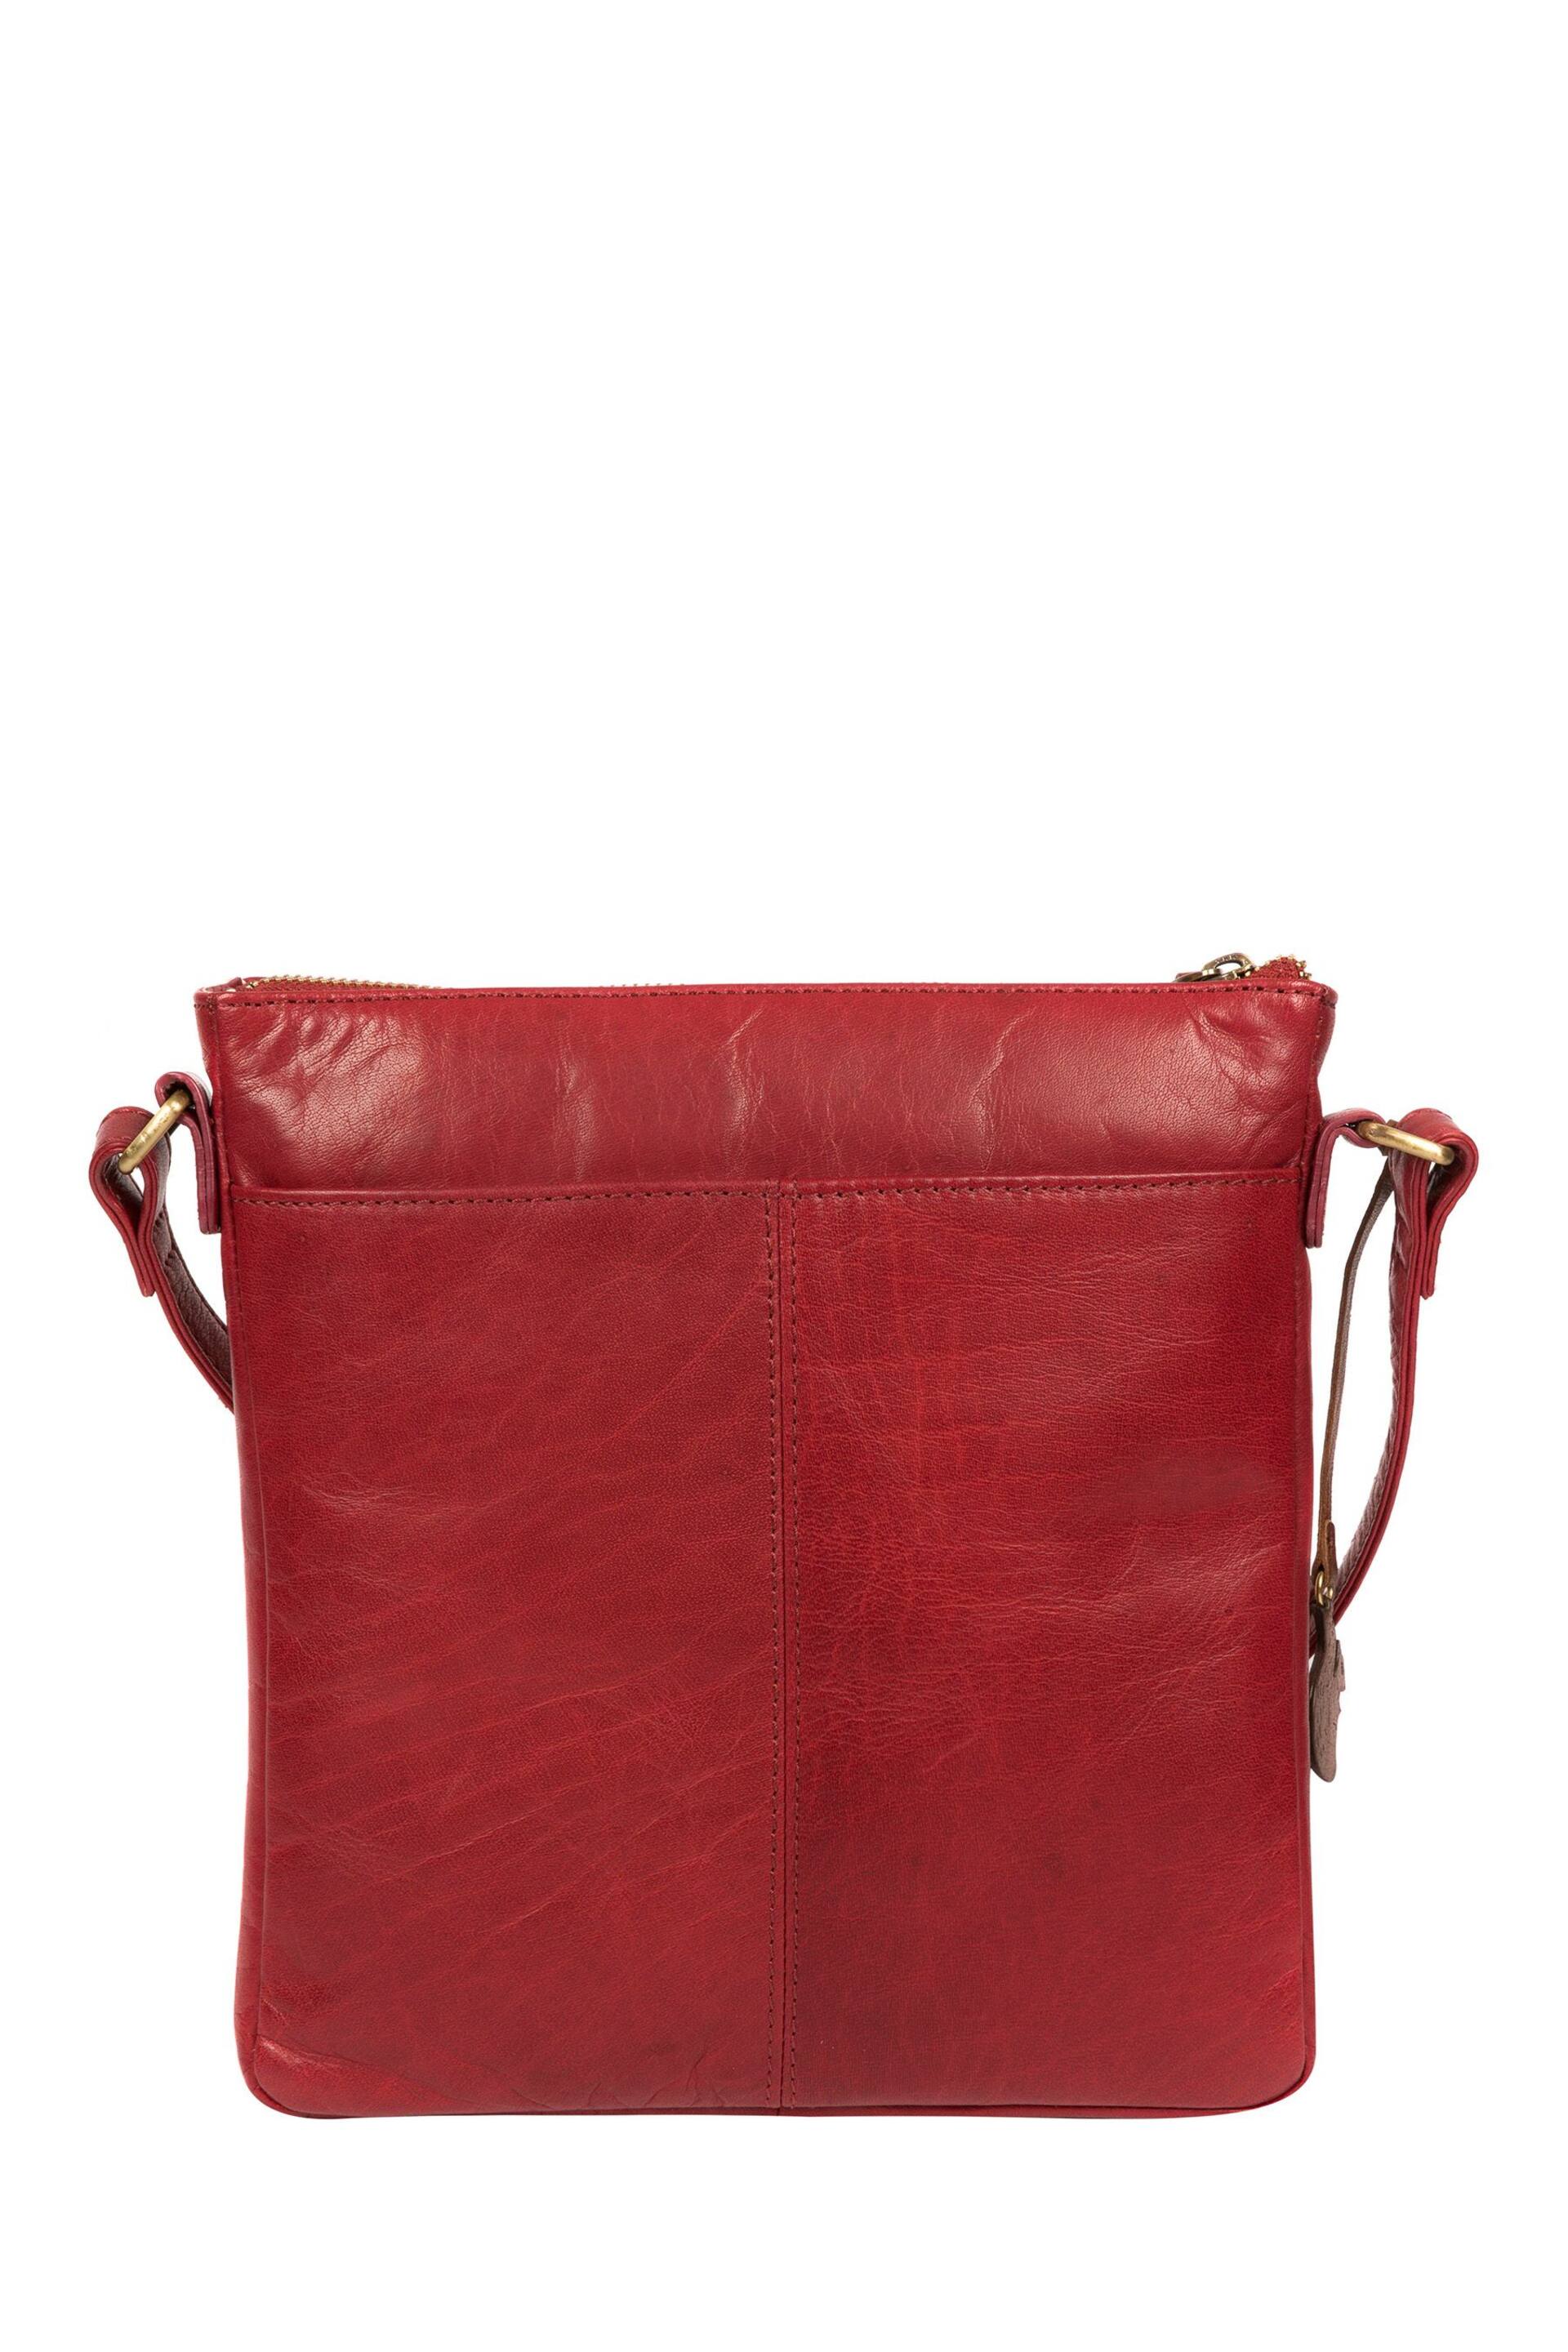 Conkca Avril Leather Cross-Body Bag - Image 4 of 5